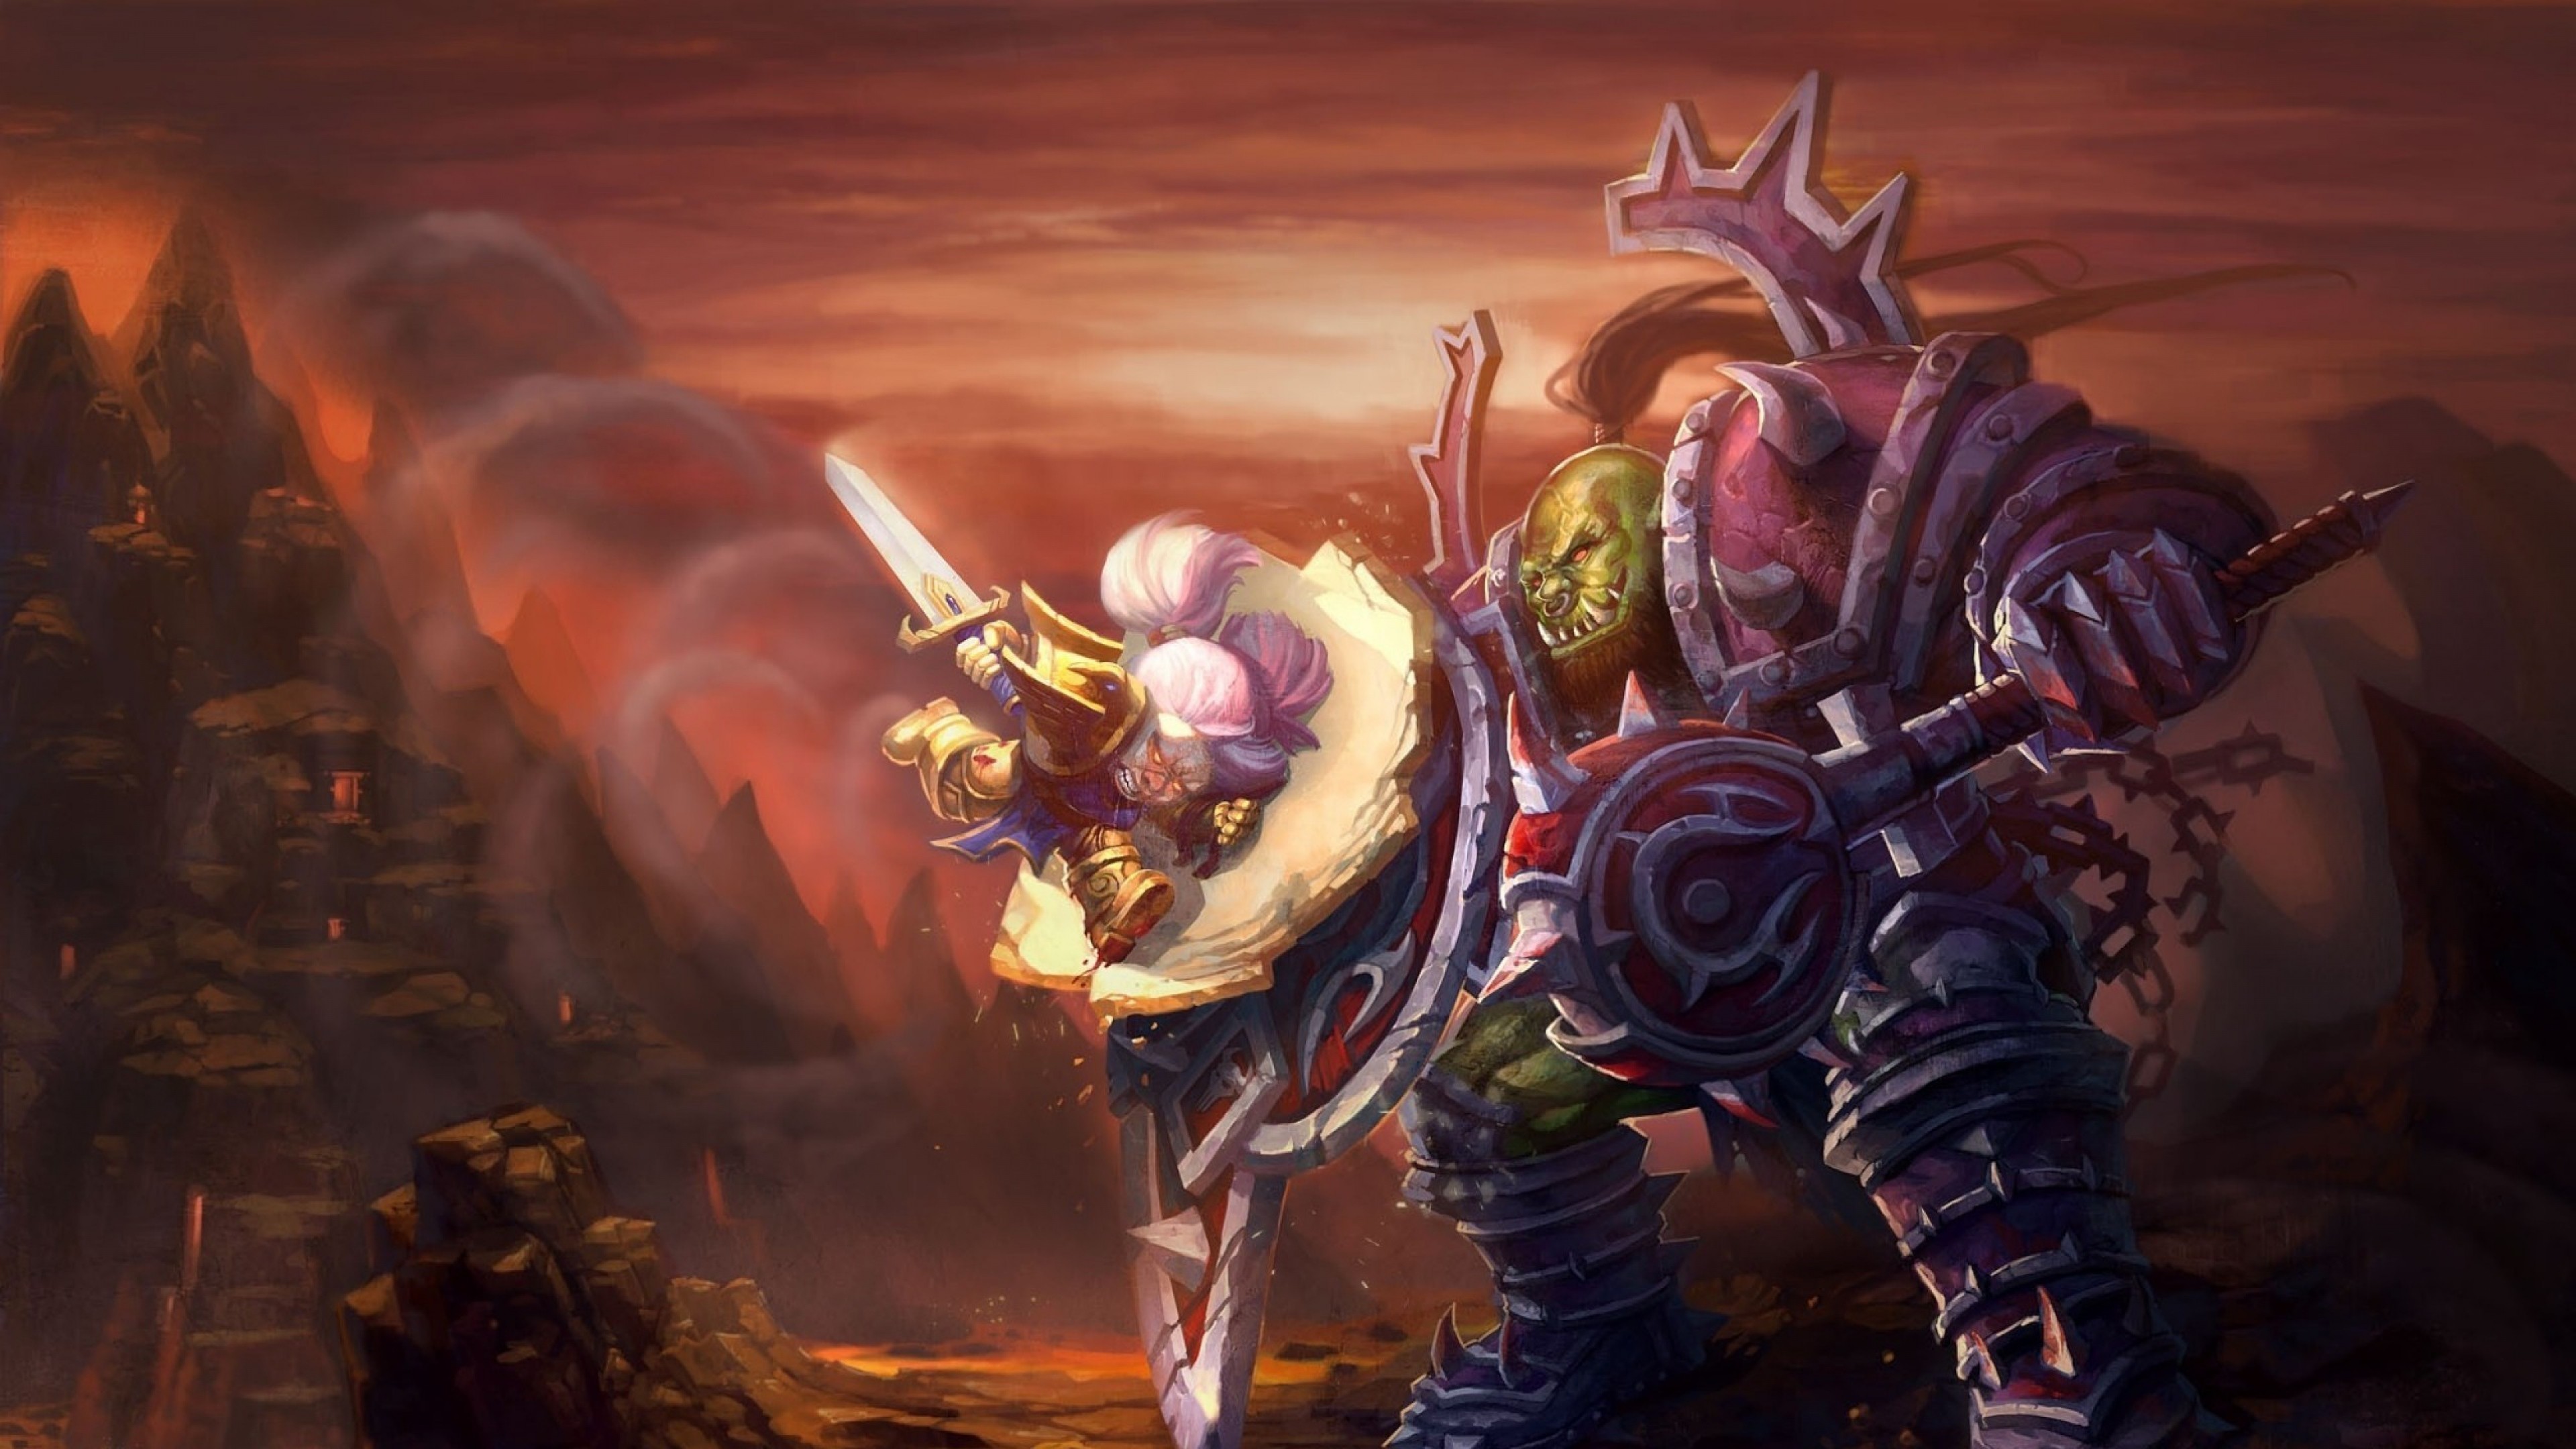 3840x2160 Preview wallpaper world of warcraft, wow, orc, warrior, dwarf, paladin  